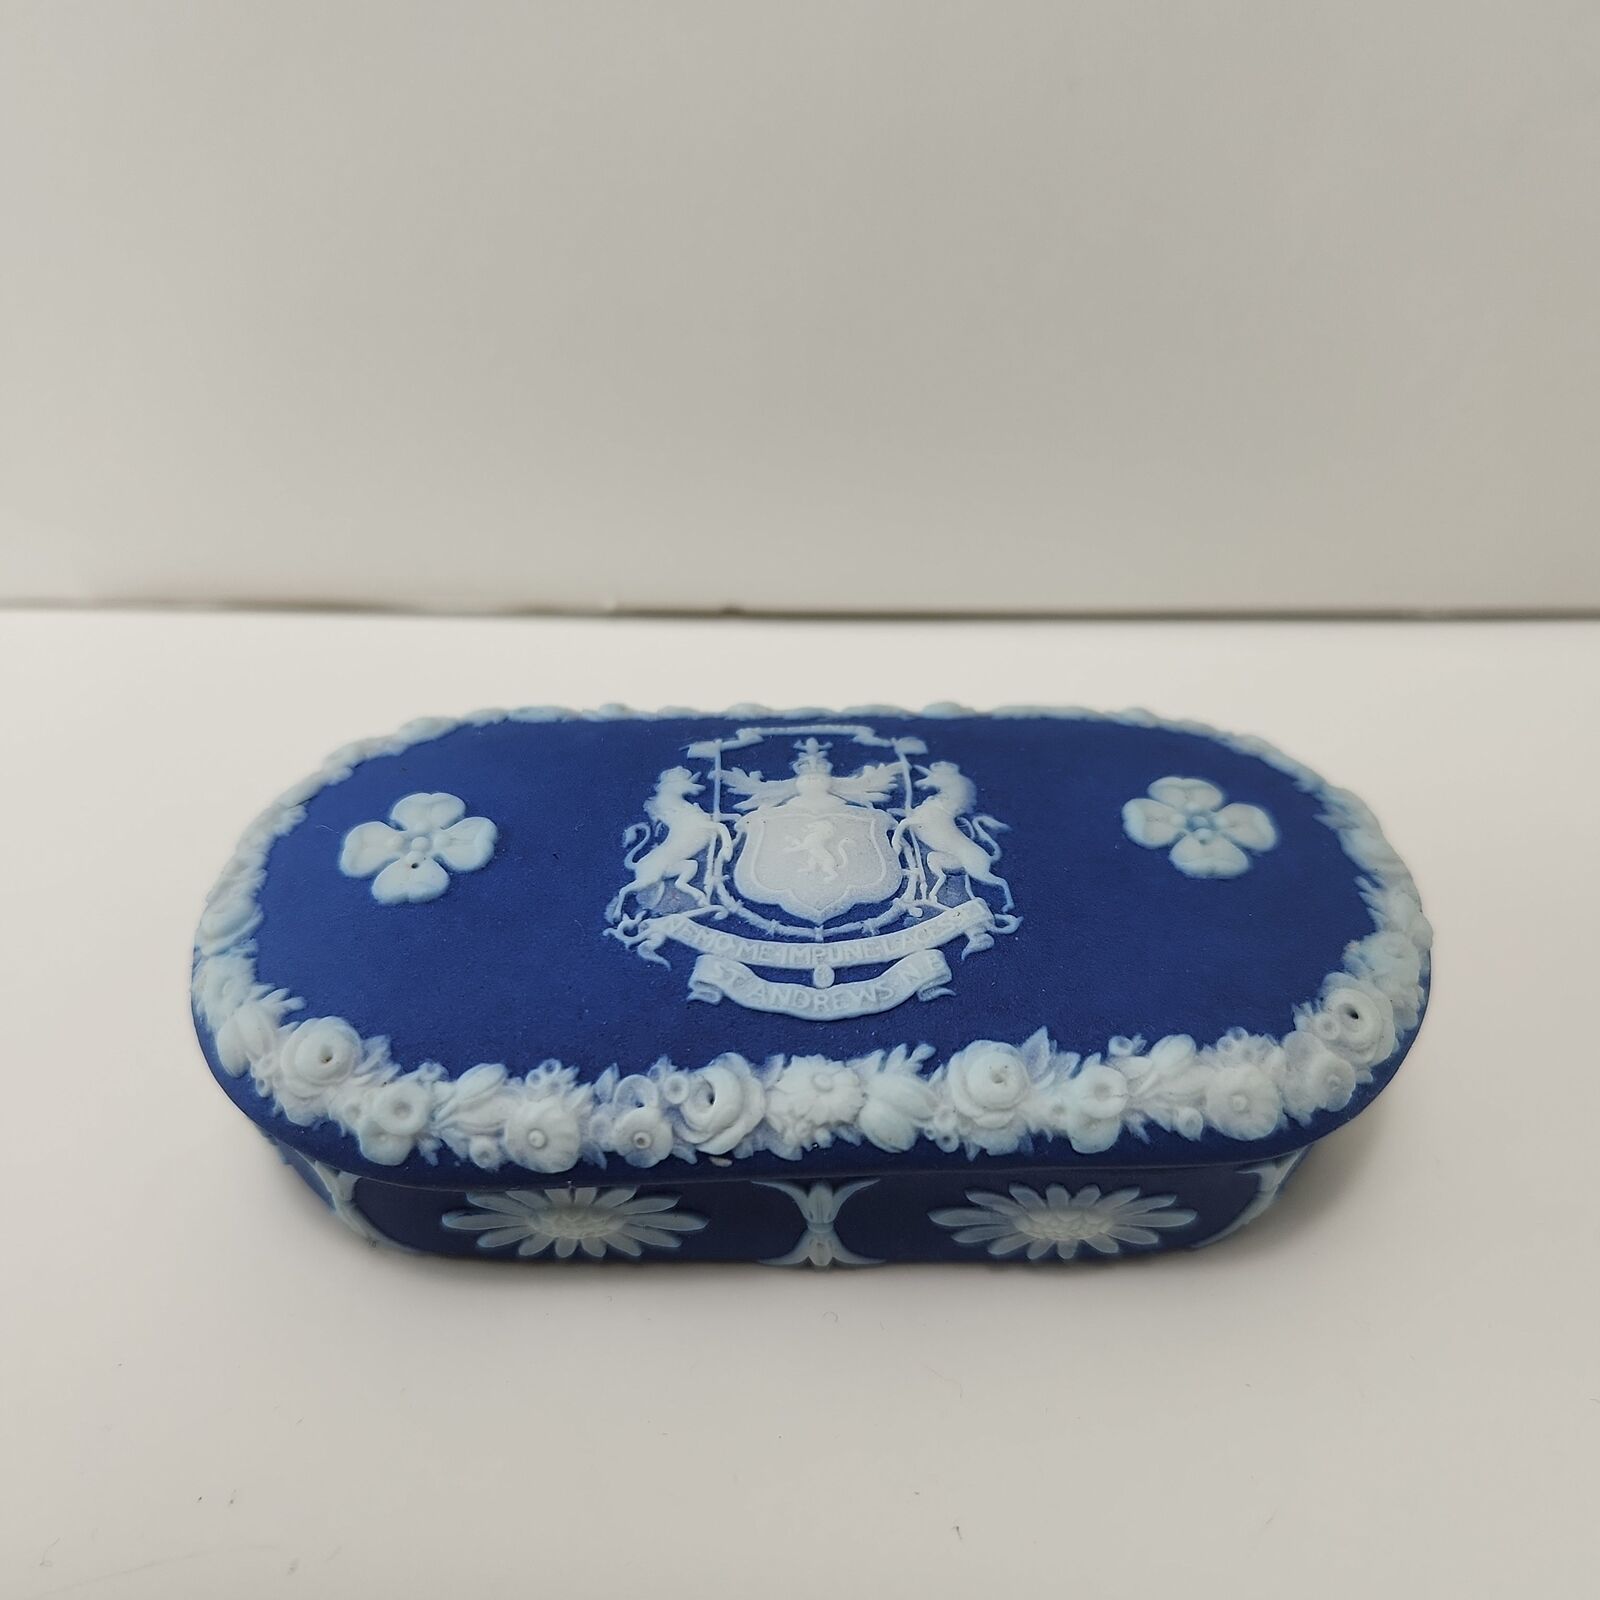 Wedgwood Matchbox St-Andrews New-Brunswick Special Edition, 1860s